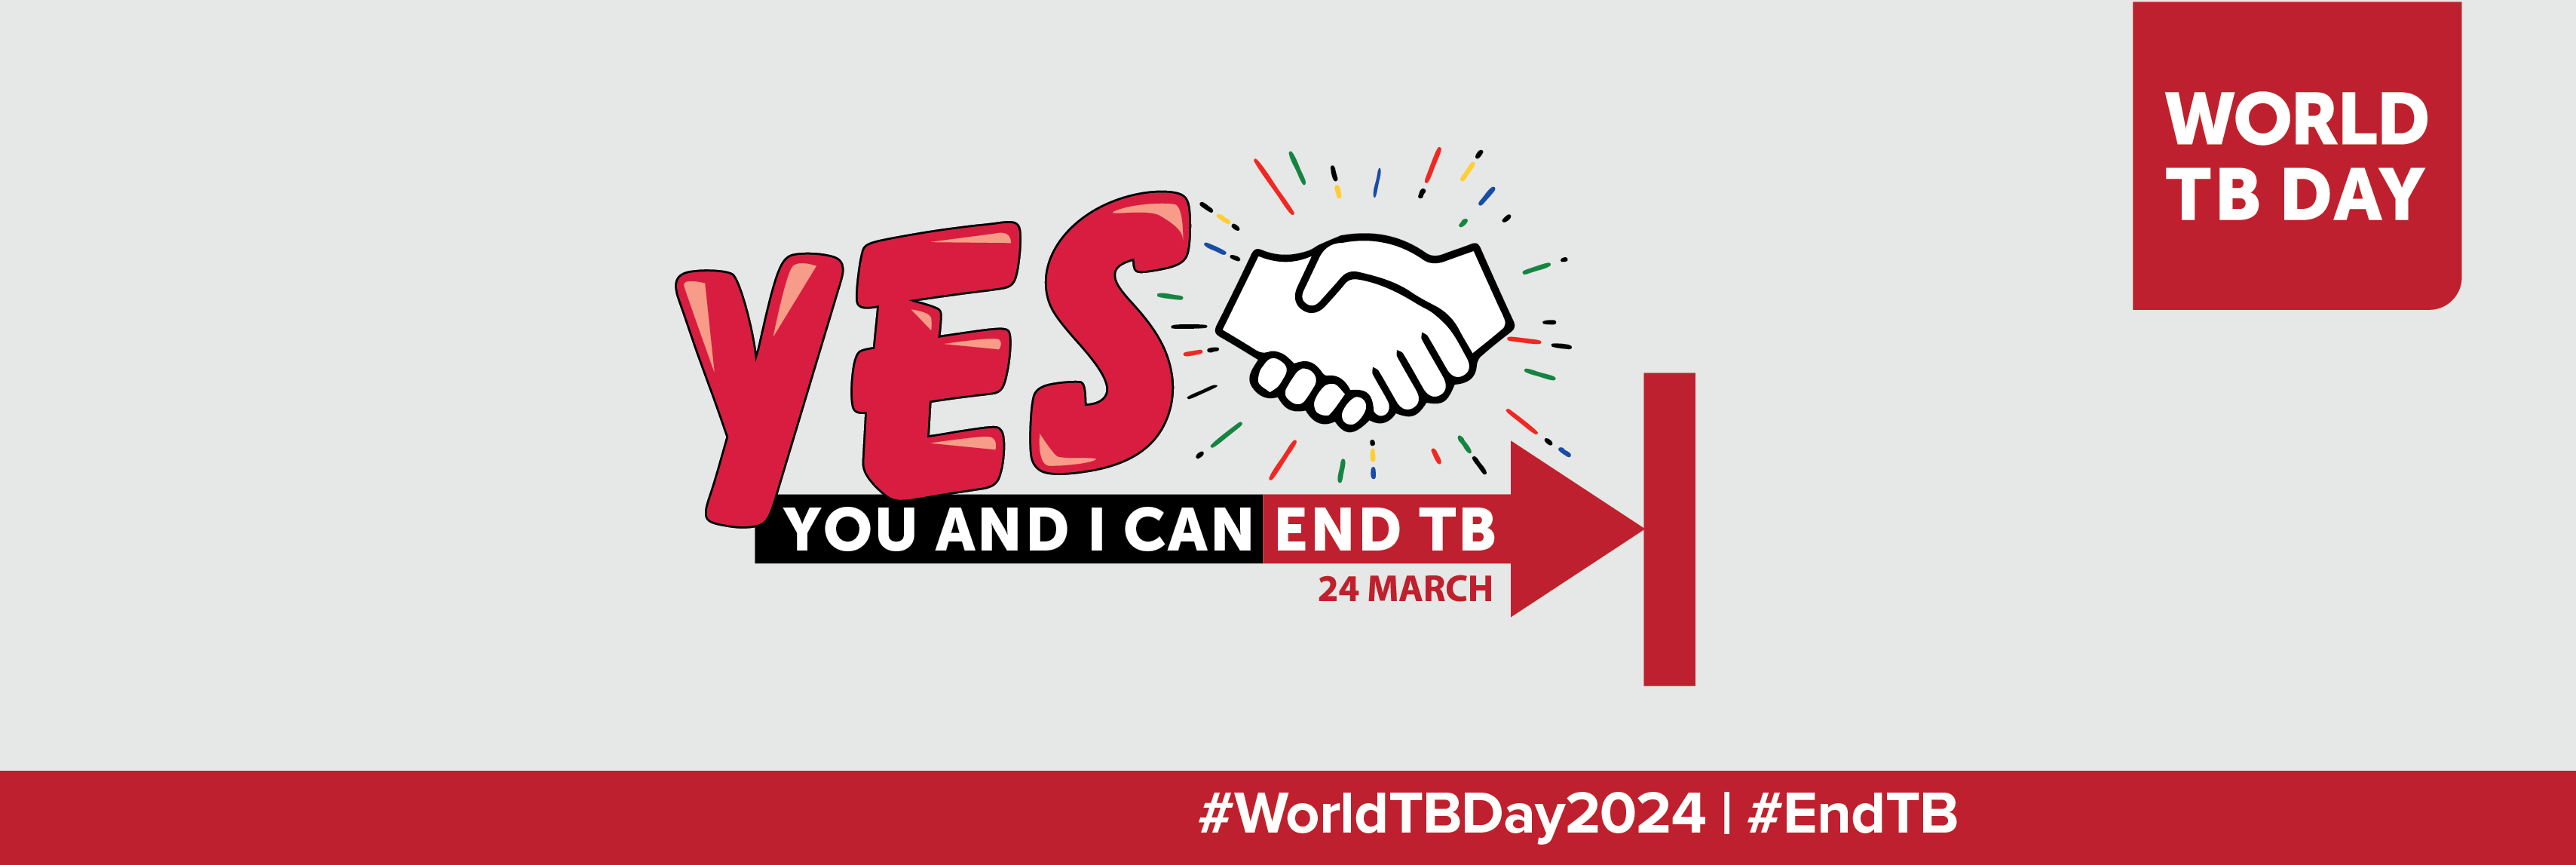 Commemoration of World TB Day 2024 - End TB